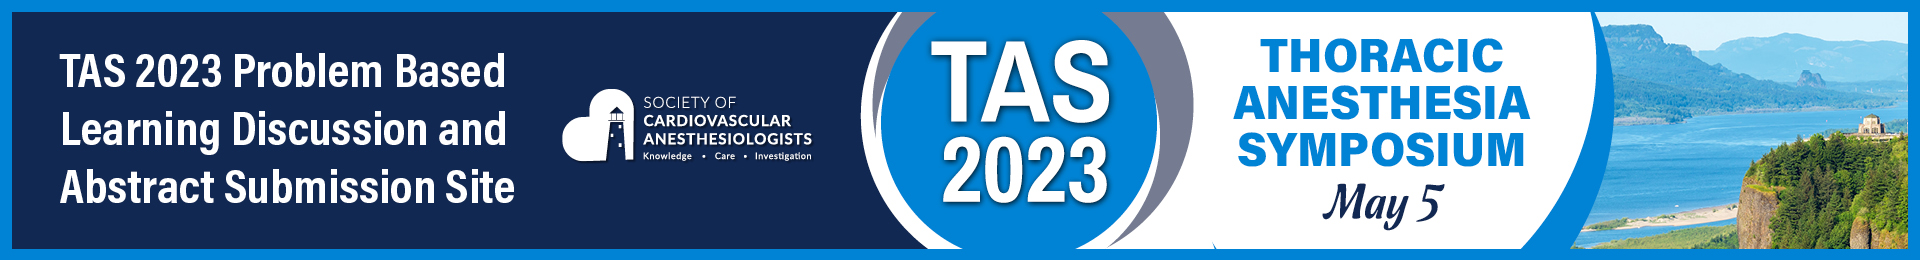 2023 Thoracic Anesthesia Symposium and Workshops  Event Banner